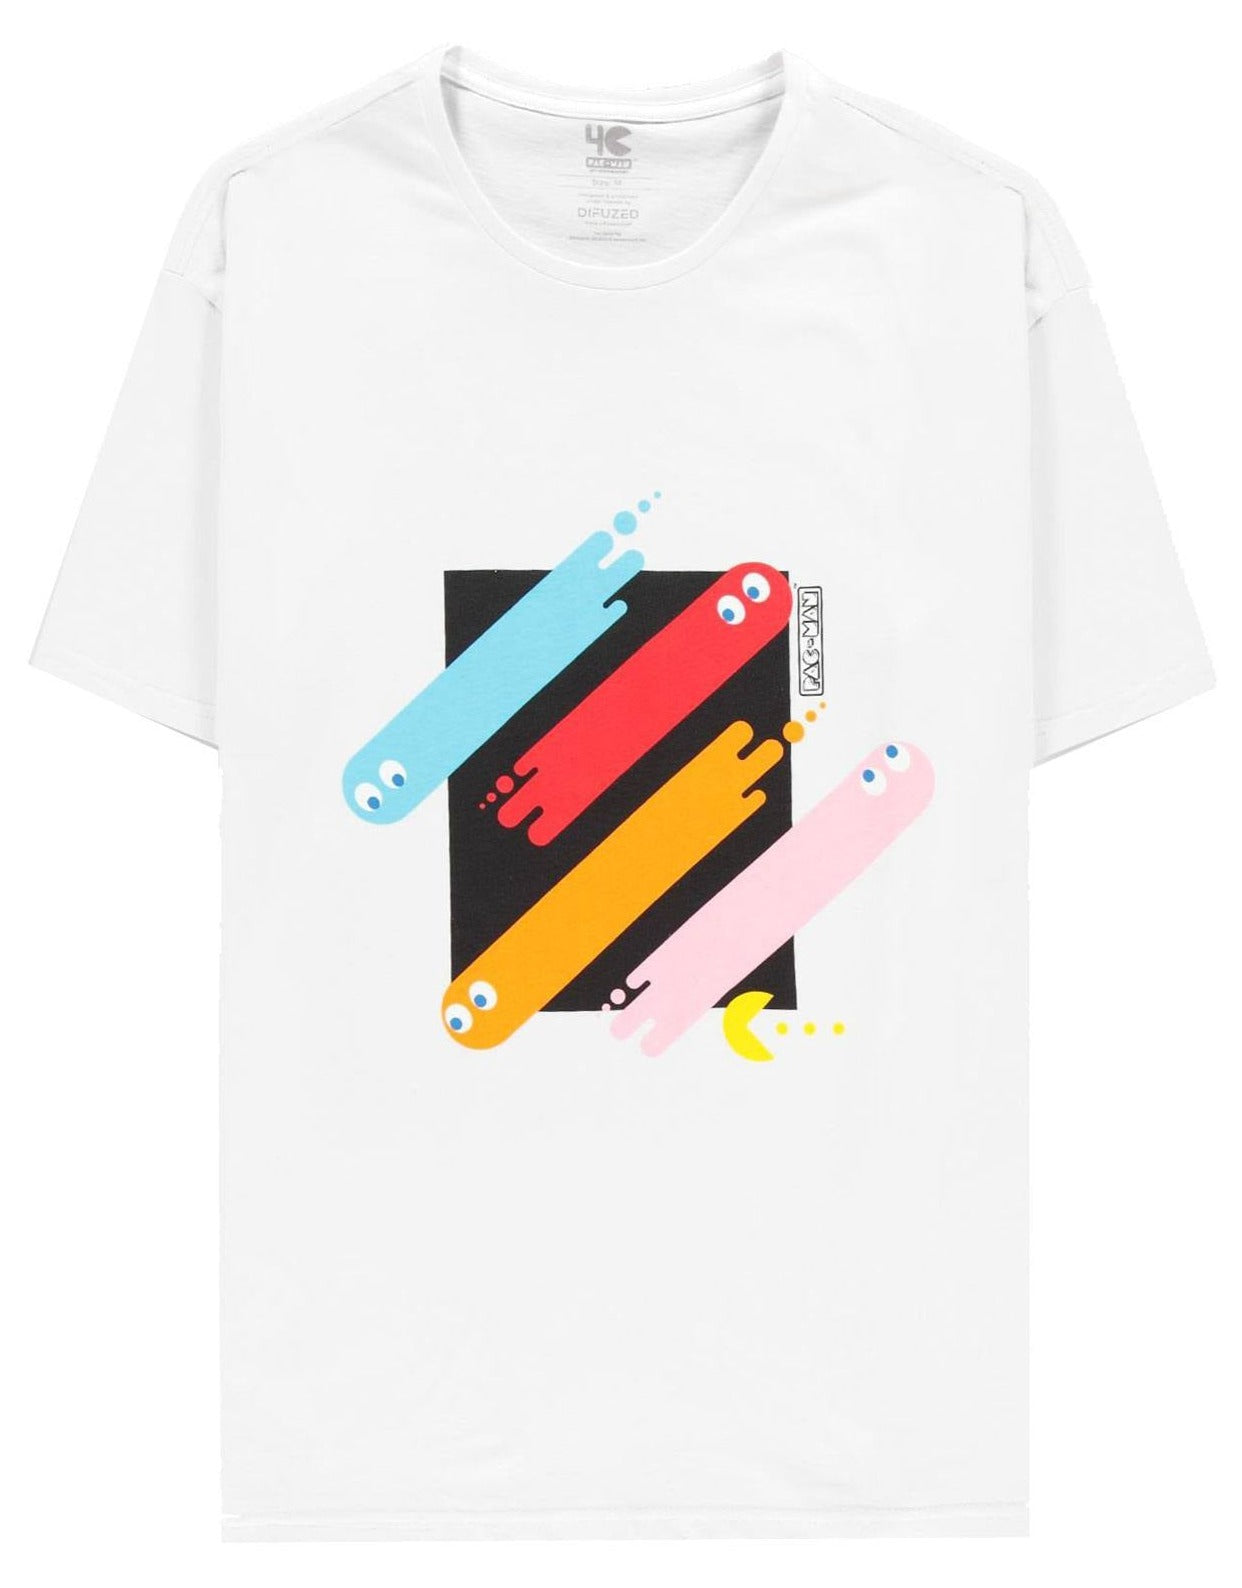 PAC-MAN Columns Logo T-Shirt ☆ Officially Licensed Clothing Small S